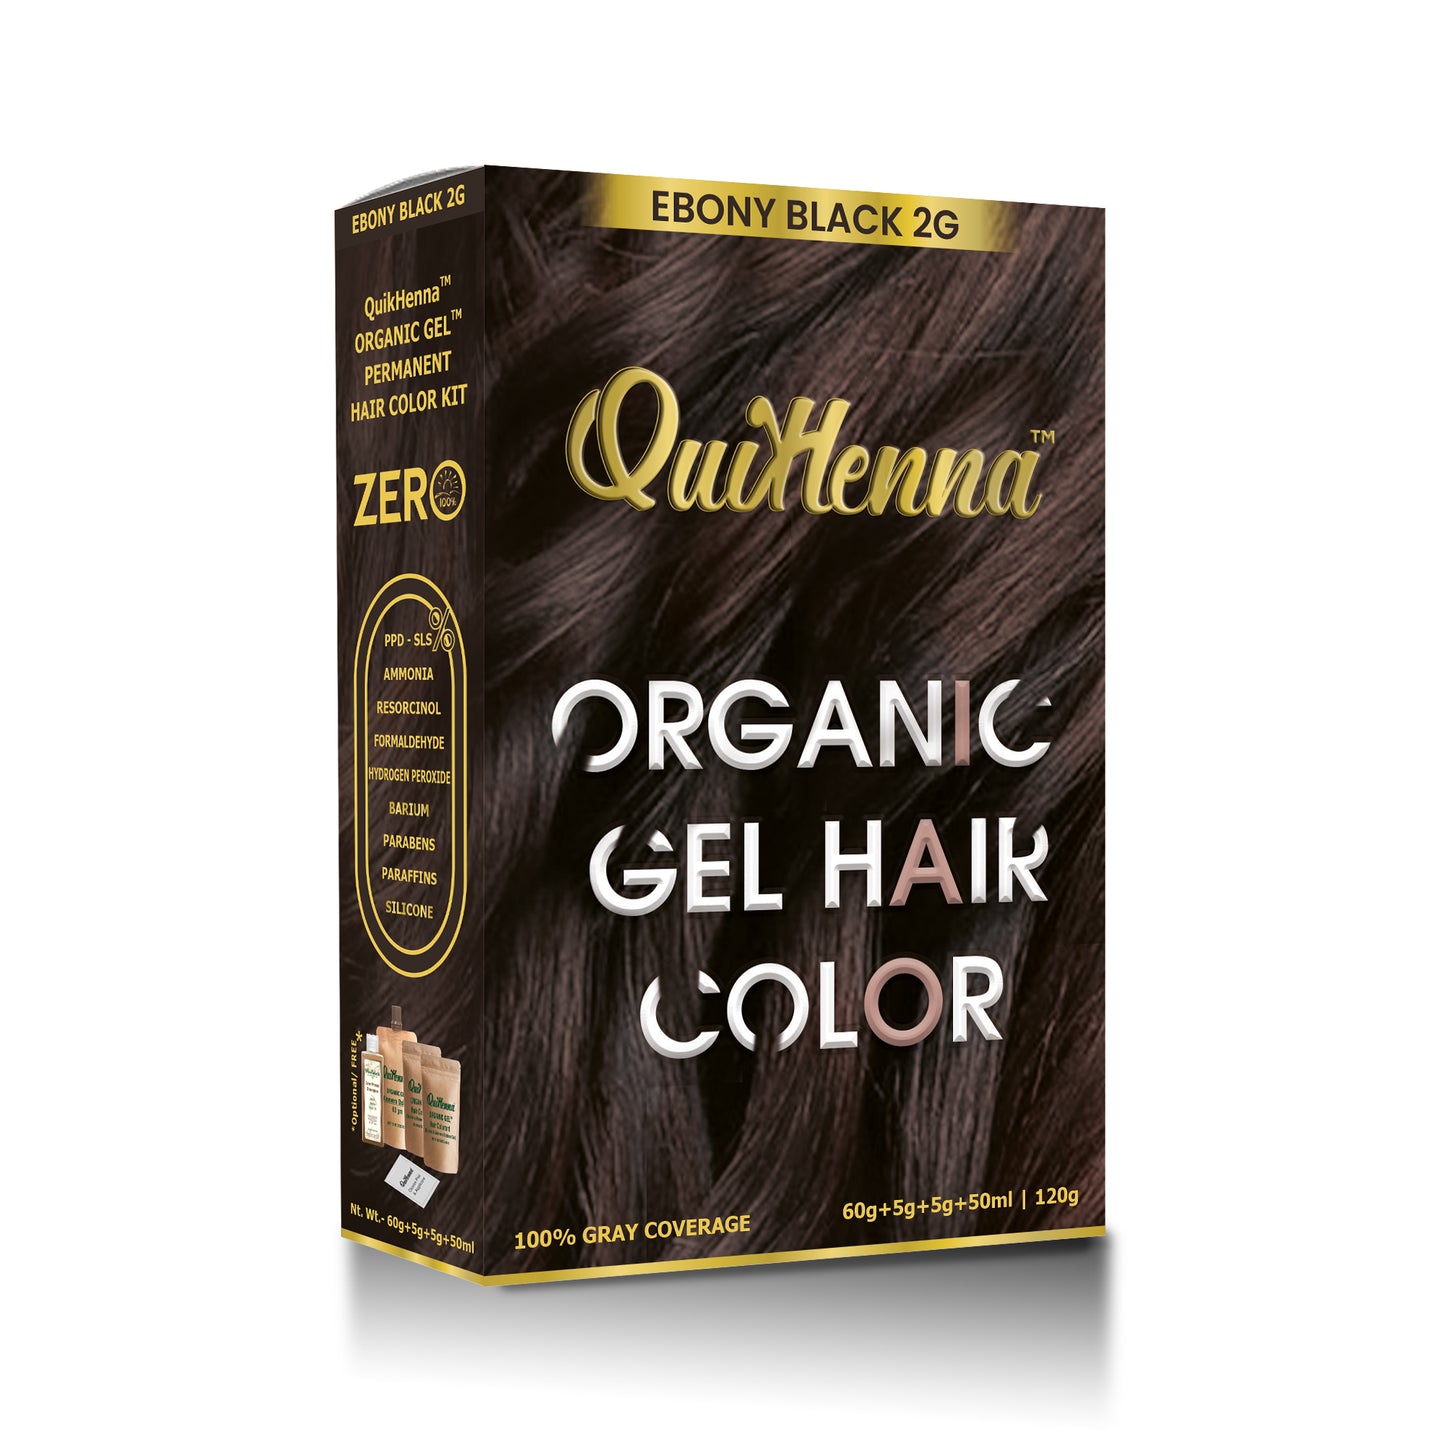 QuikHenna Organic Gel Hair Colour for men and women ebony black ammonia and ppd free color